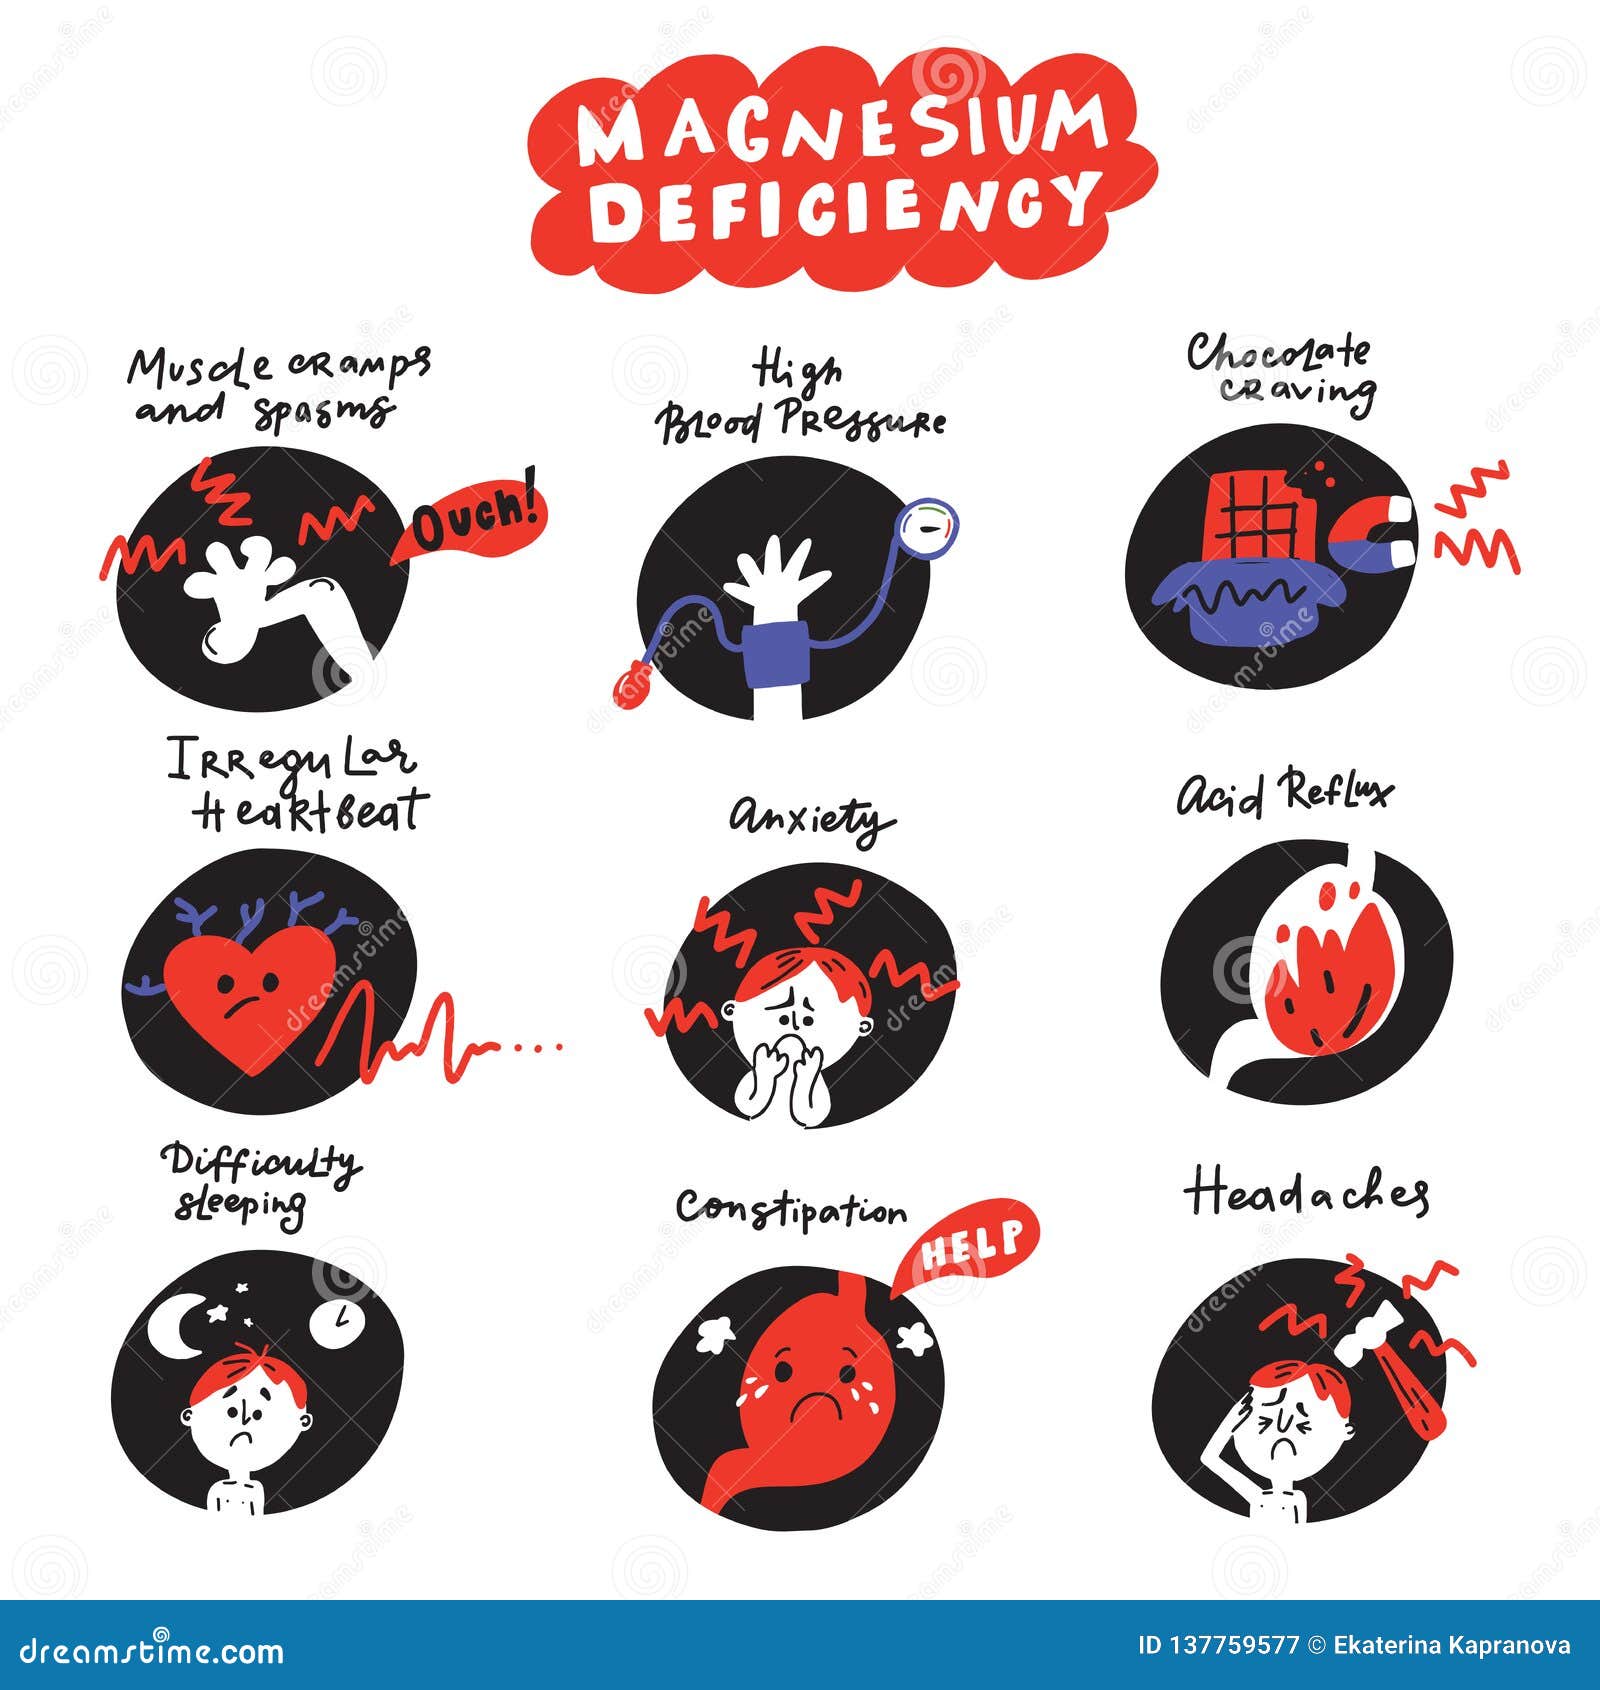 funny hand drawn icons about magnesium deficiency symptoms. .